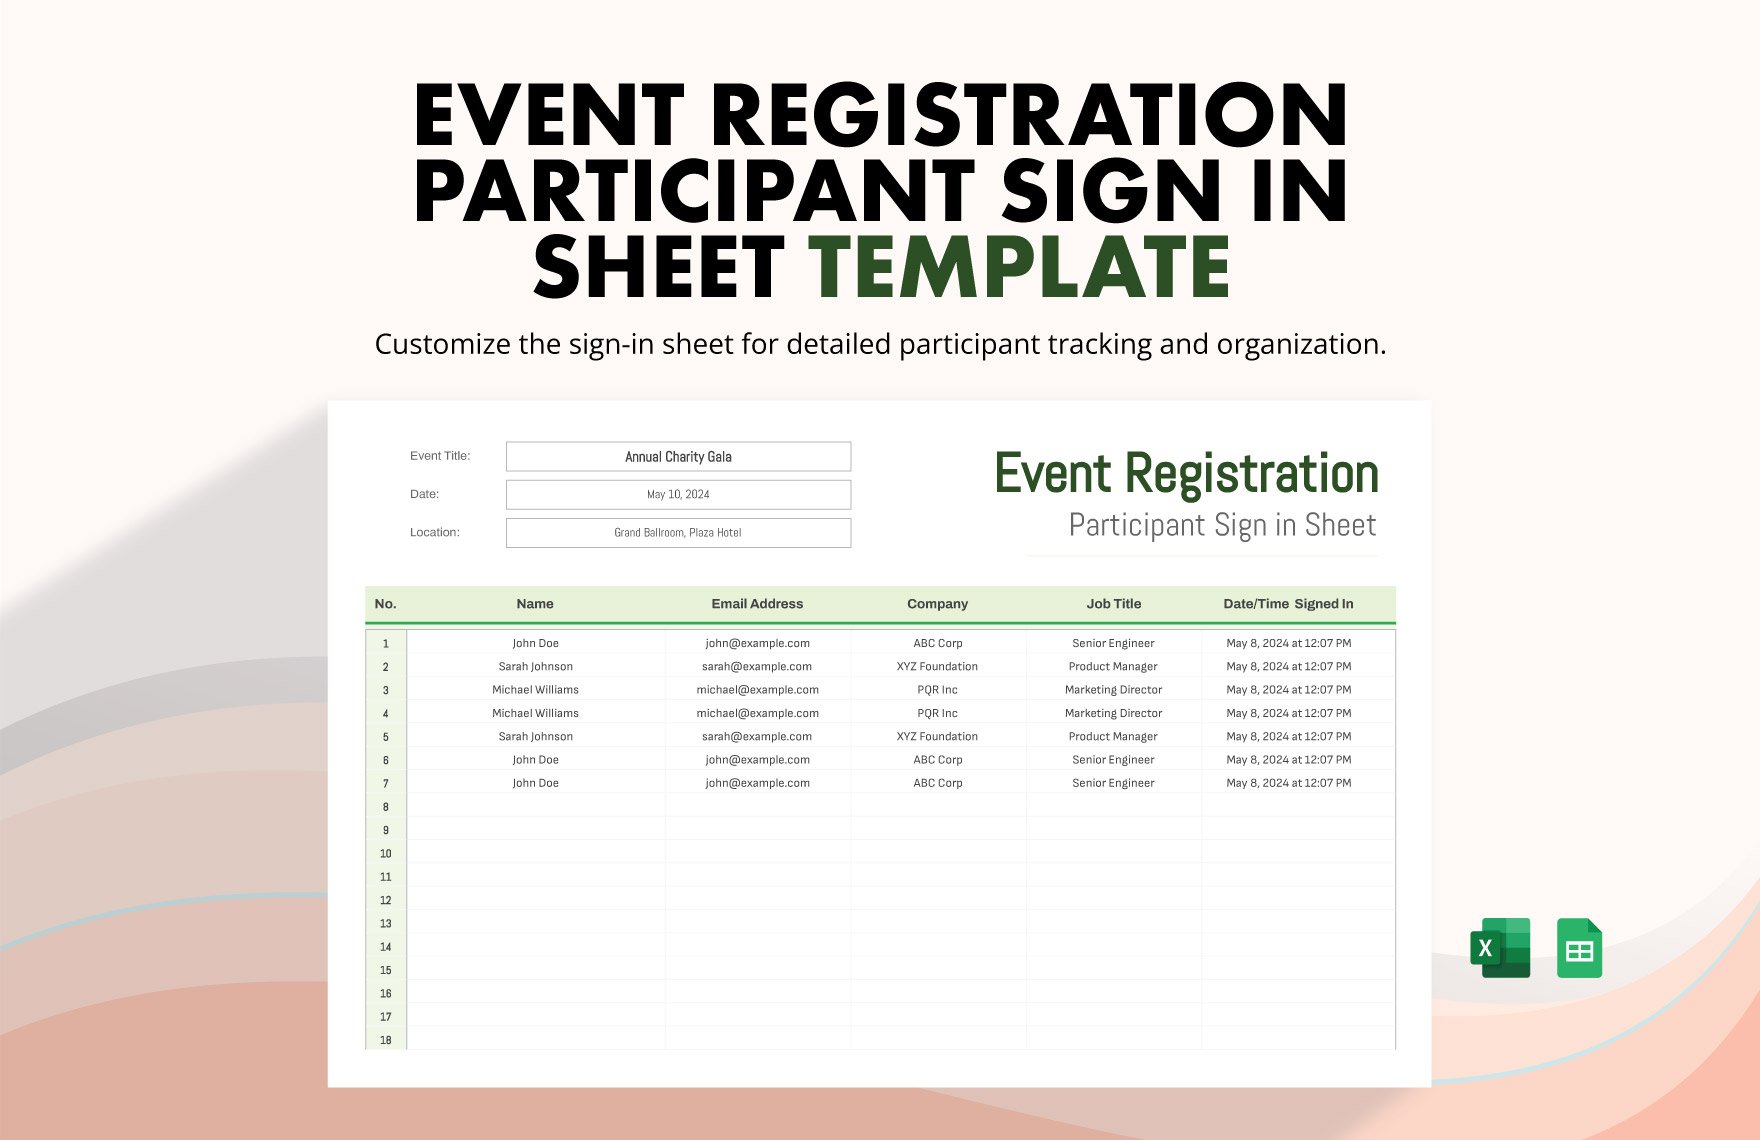 Event Registration Participant Sign in Sheet Template